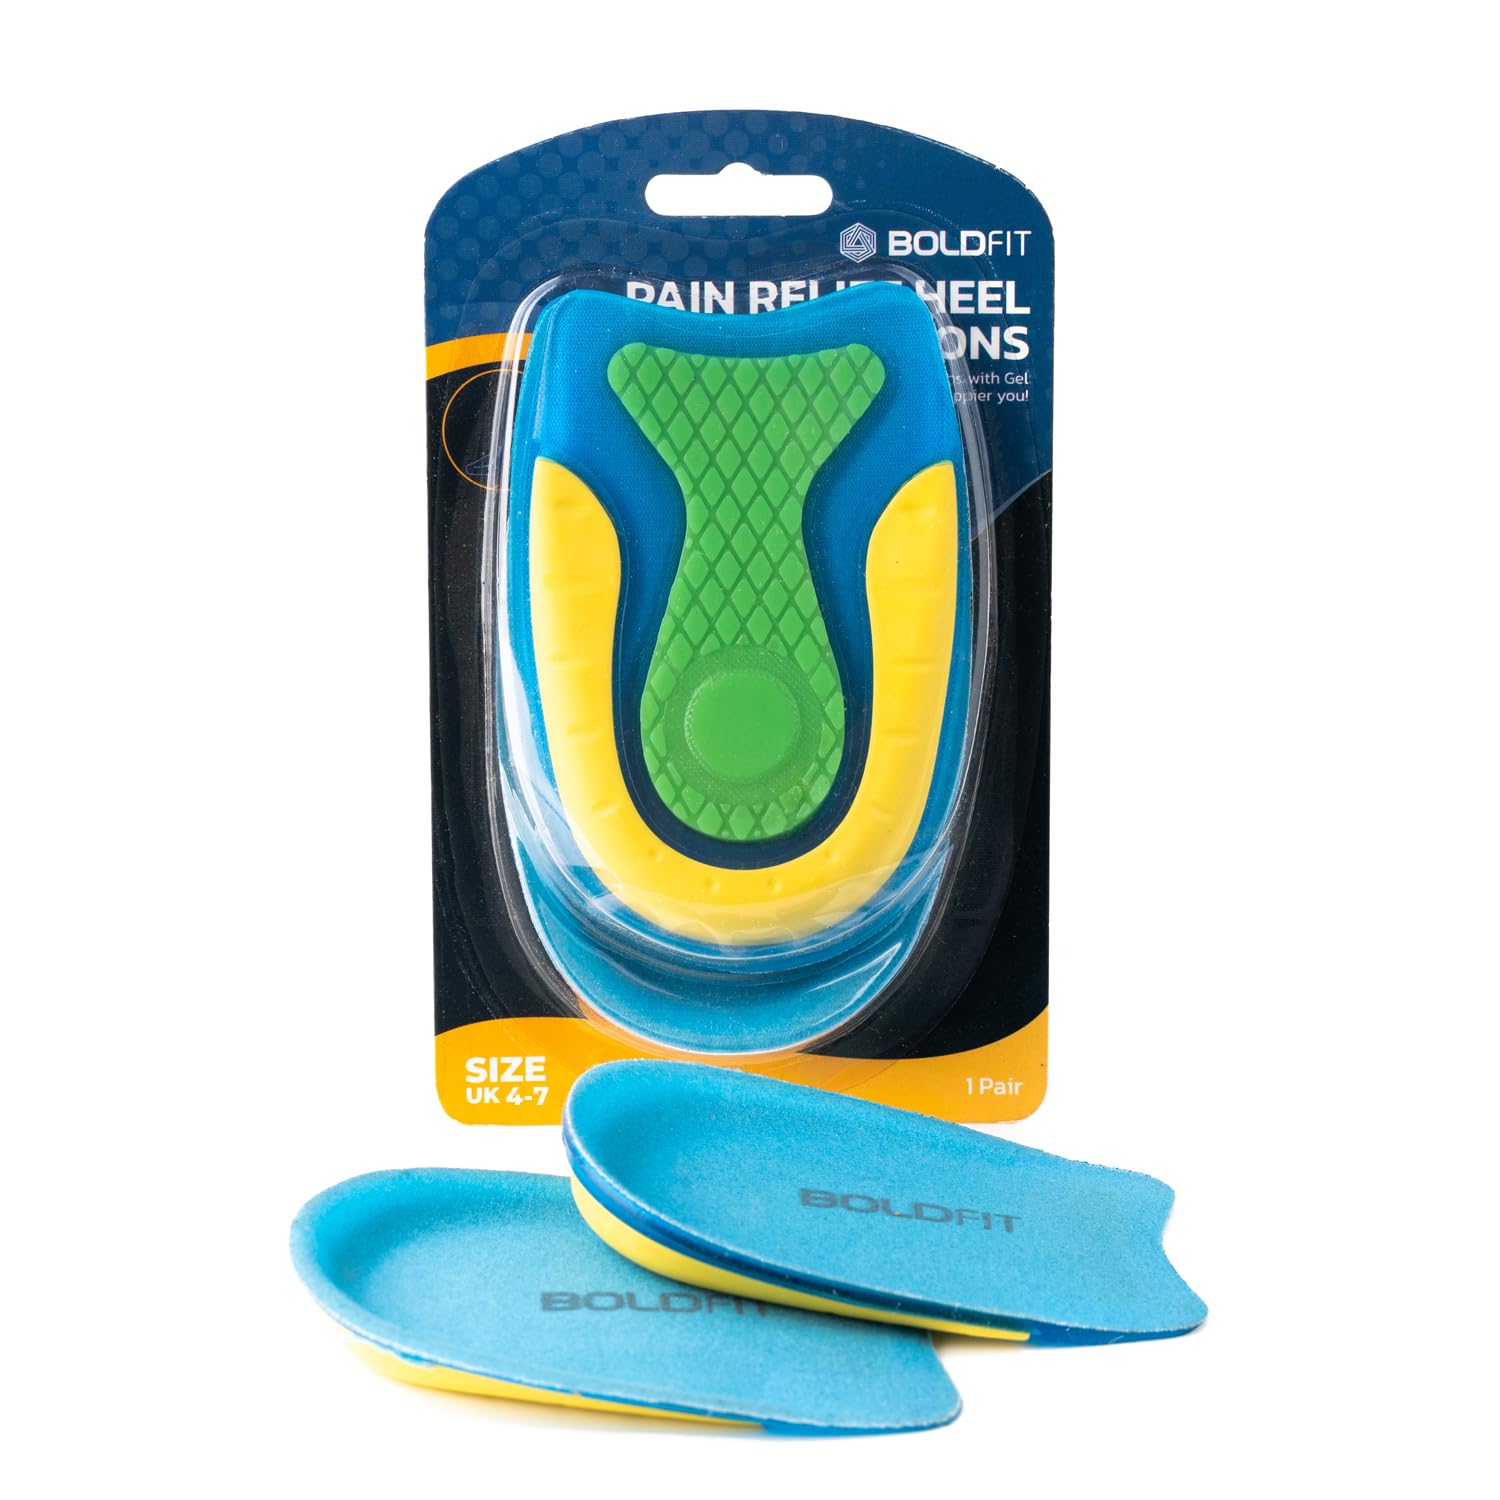 Arch & Heel Support For Pain Relief